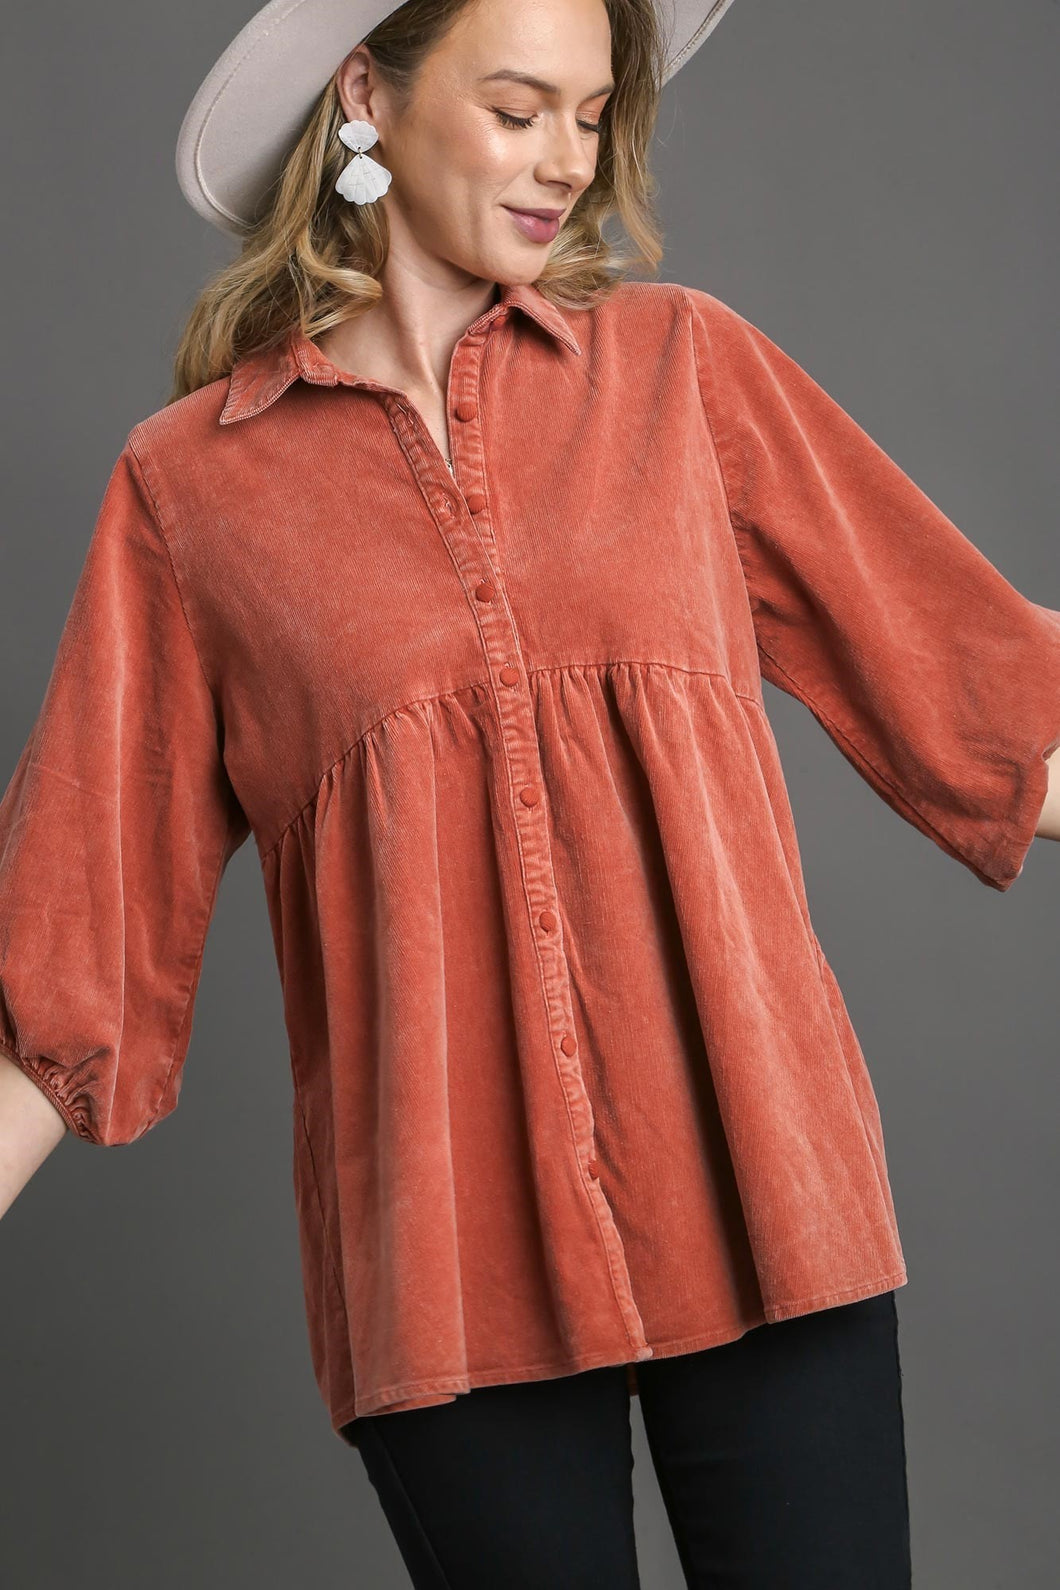 Umgee Mineral Washed Corduroy Tunic Top in Brick Shirts & Tops Umgee   